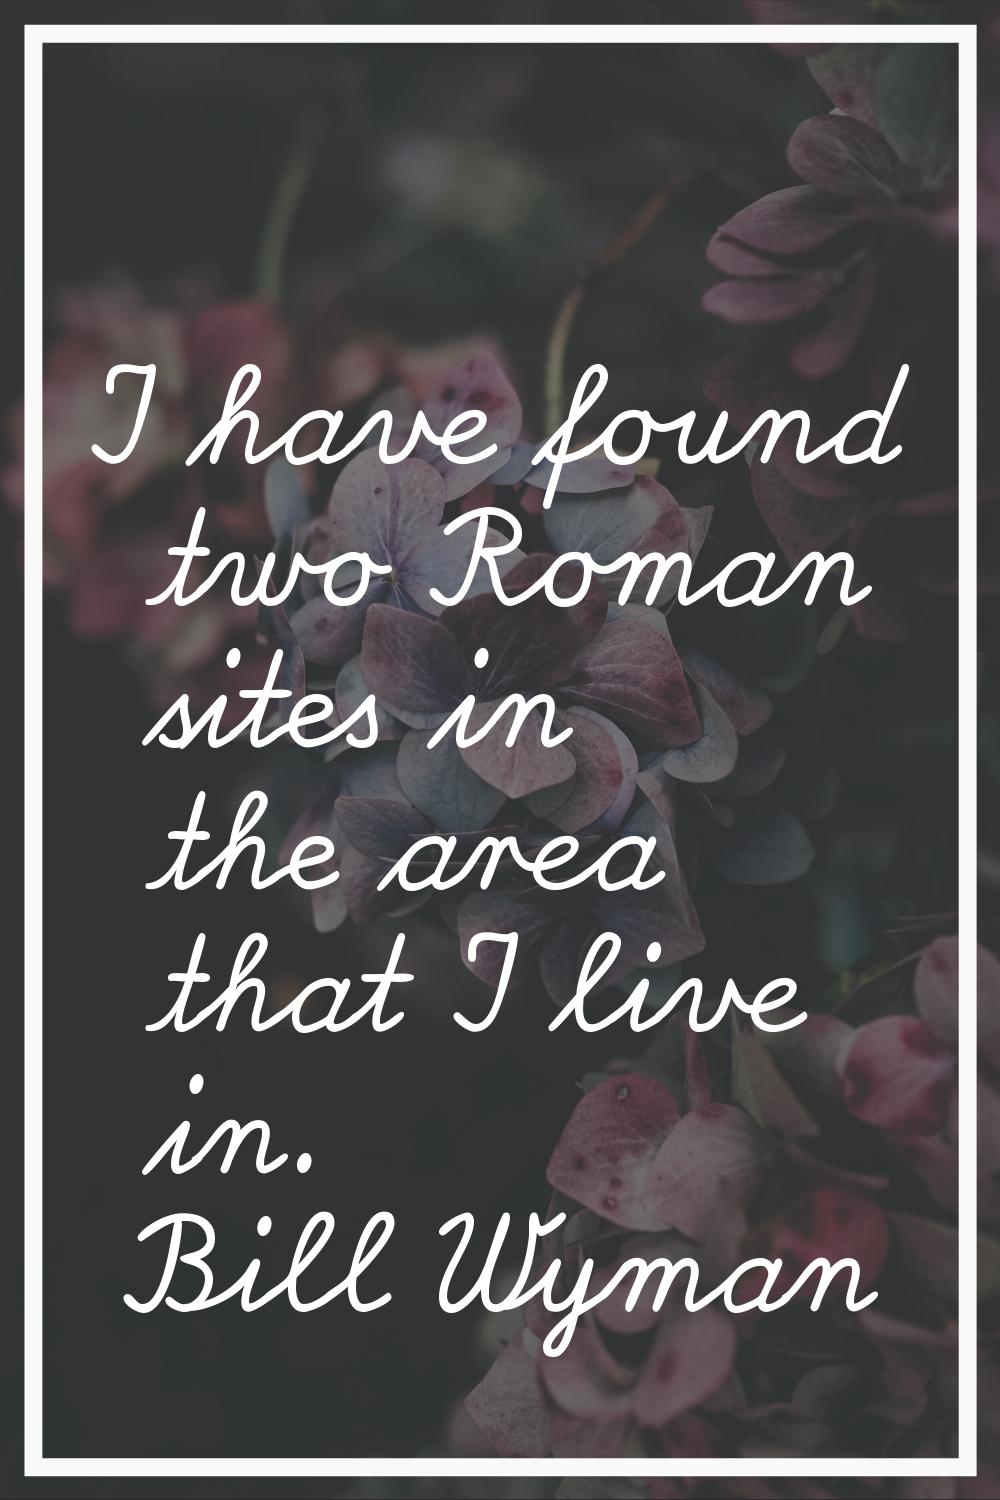 I have found two Roman sites in the area that I live in.